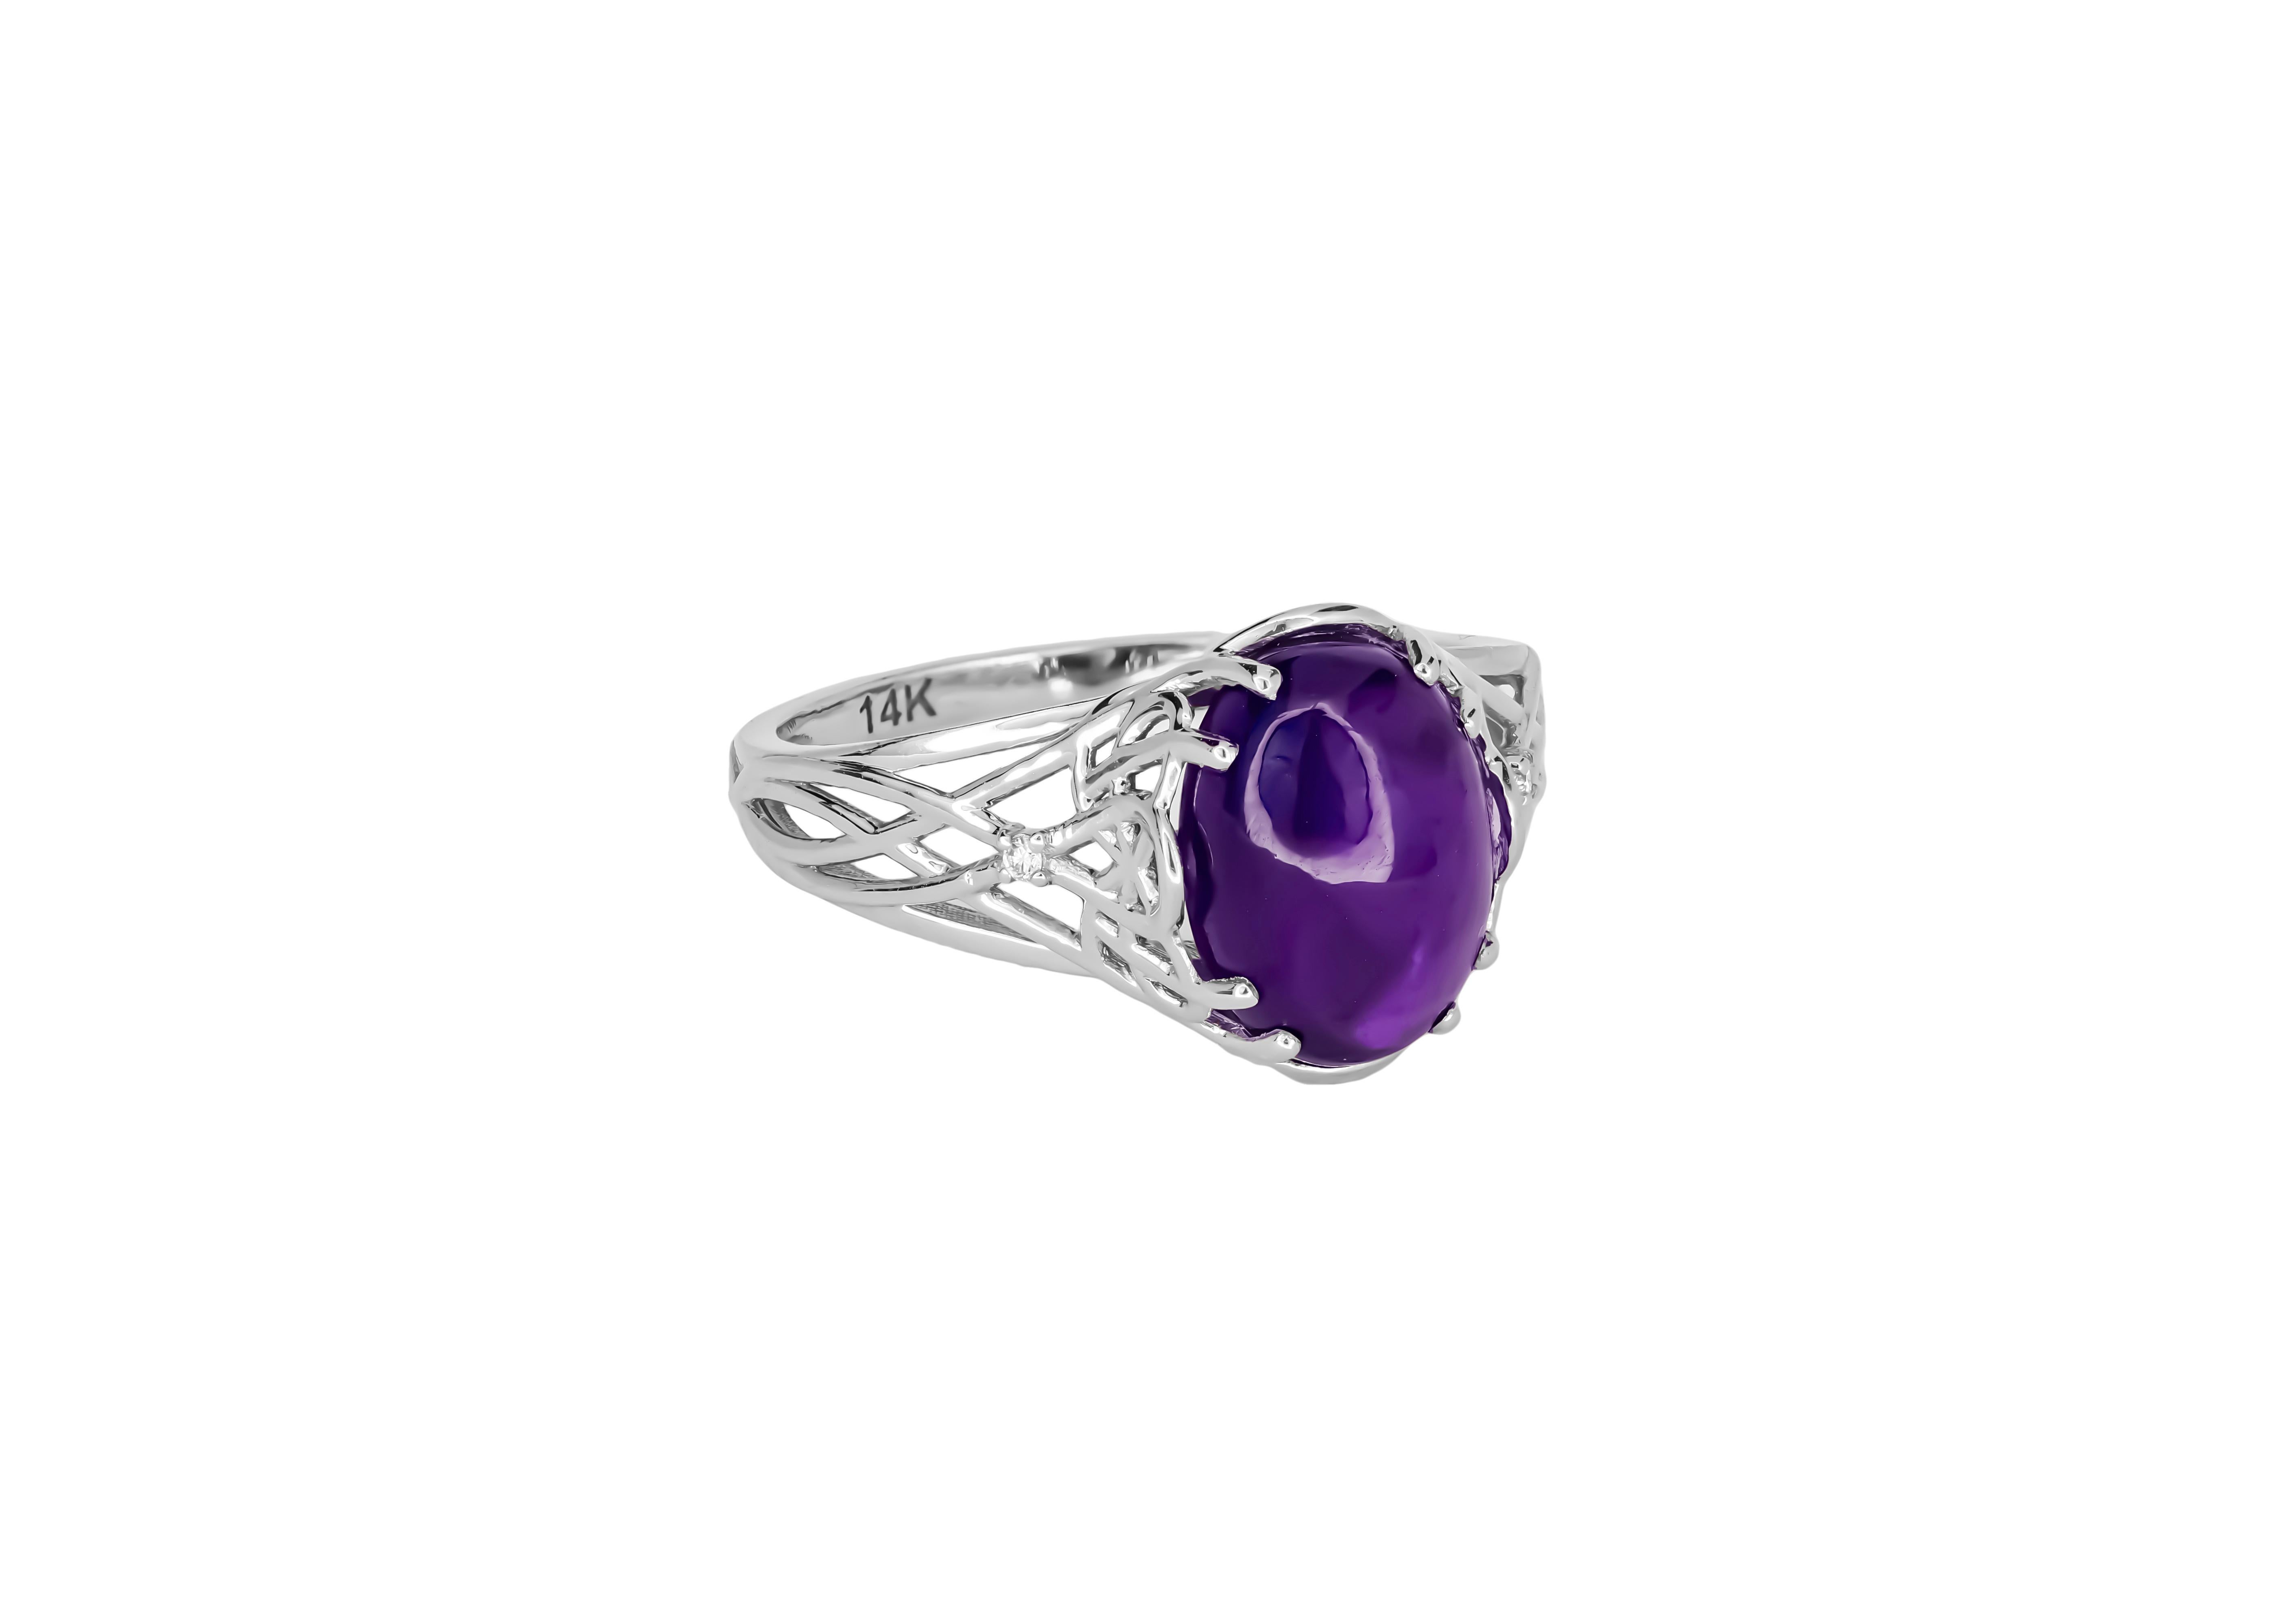 Cabochon Amethyst cabochon 14k gold ring.  For Sale